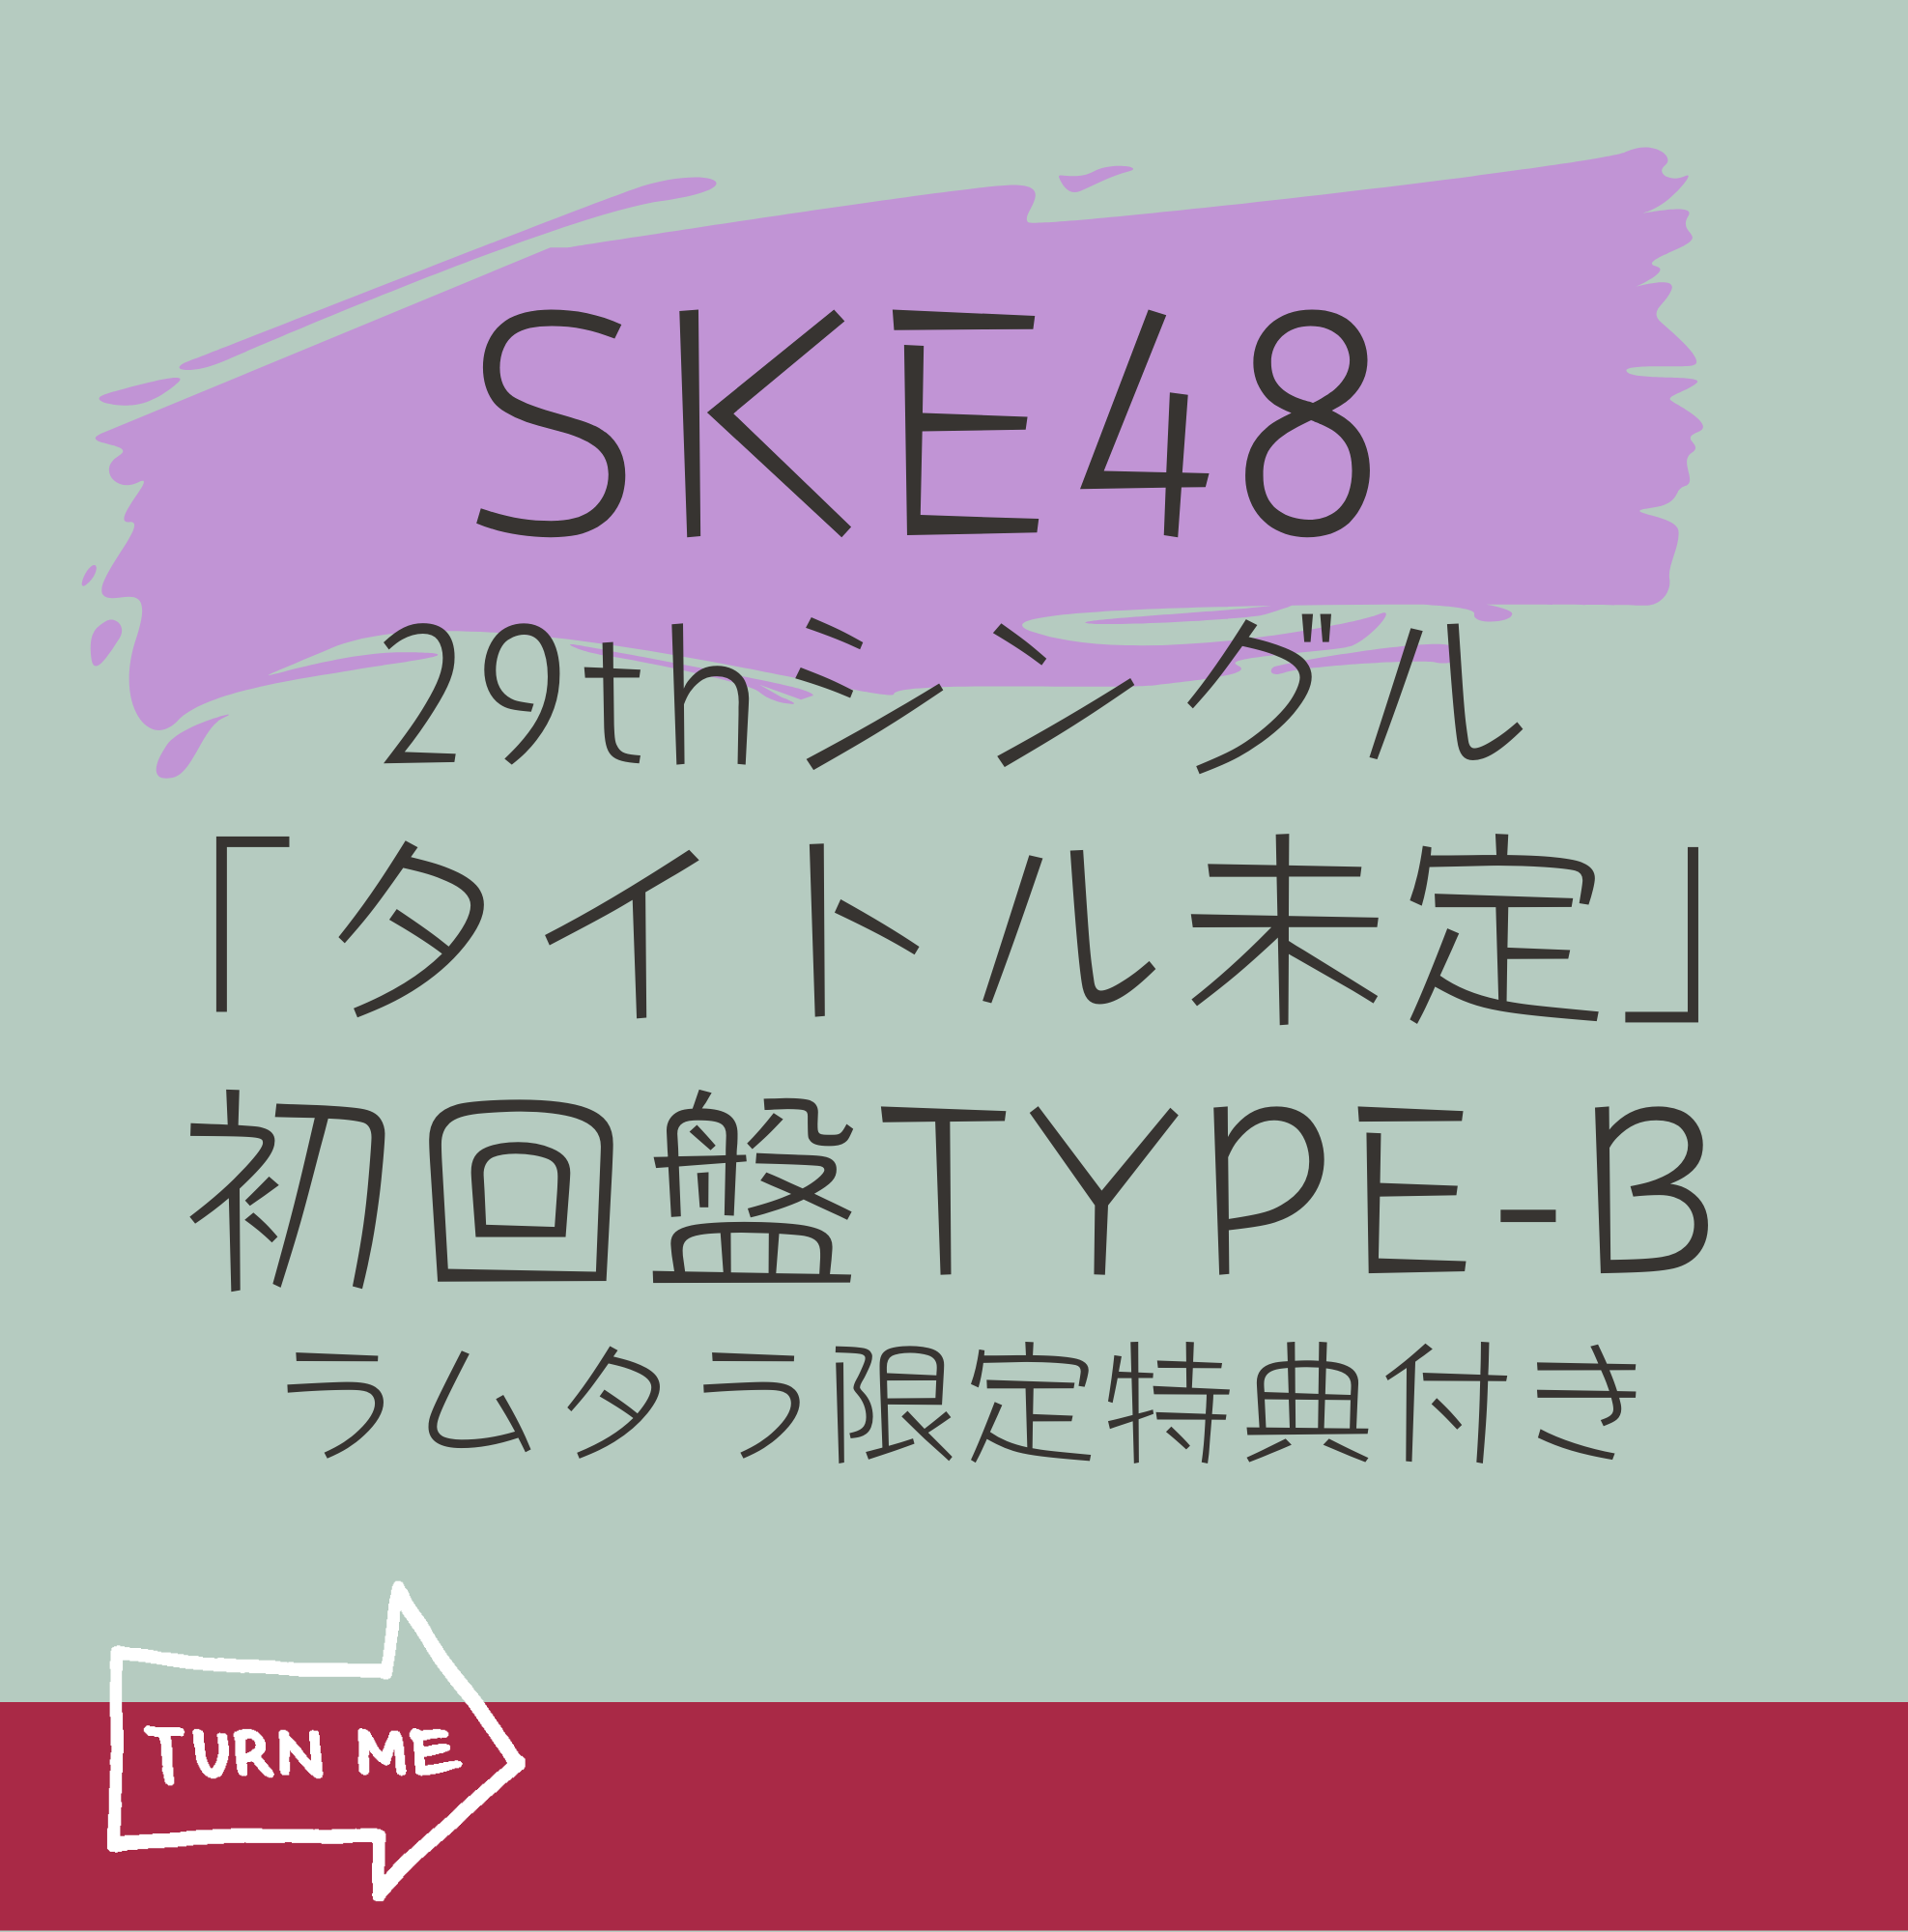 <strong style="font-size:12px;color:red;"><font color="red">予約受付中!</font></strong> SKE48  29thシングル「タイトル未定」(CD+DVD)【初回限定盤 TYPE-B】 ラムタラ限定特典付き